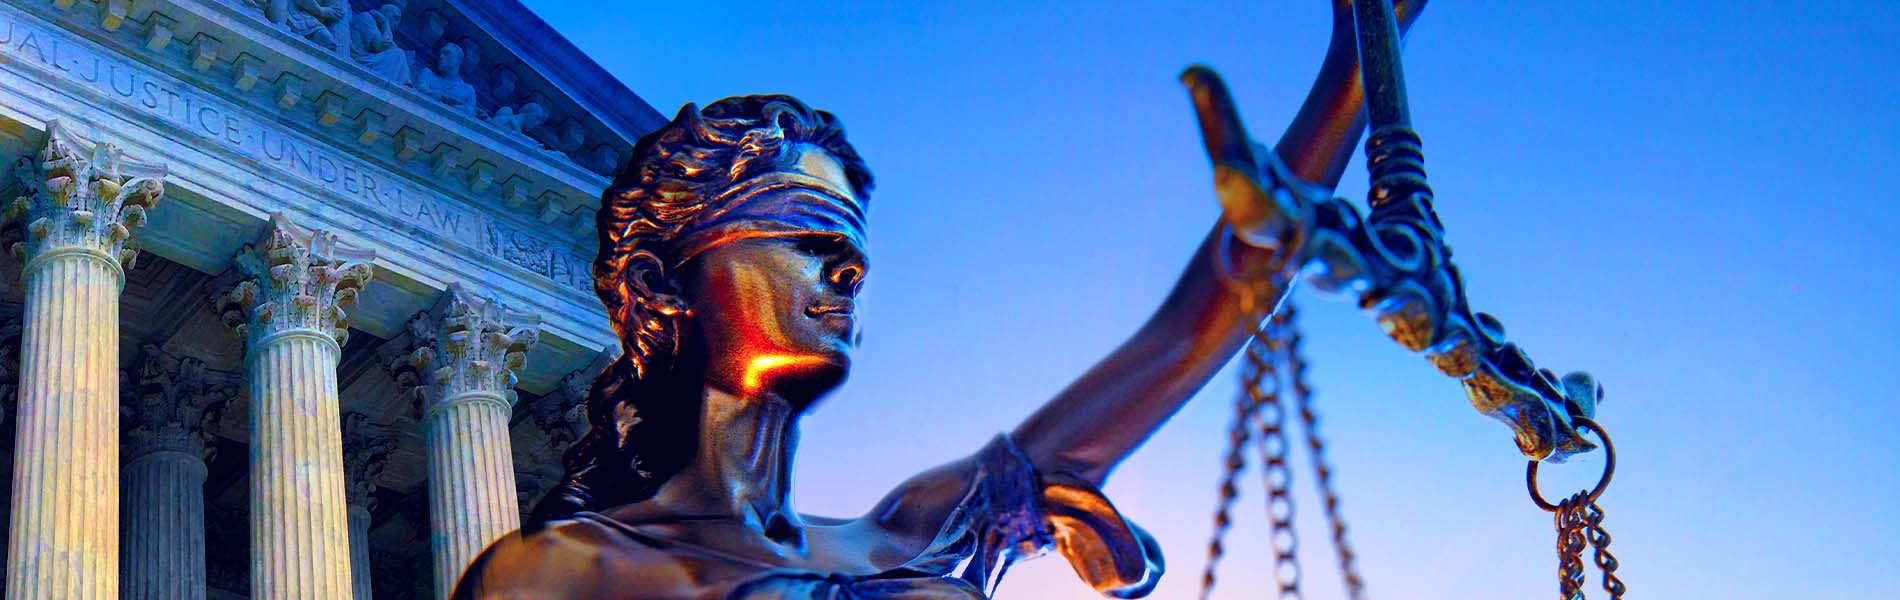 Image of Lady Justice statue outside courthouse against a blue sky